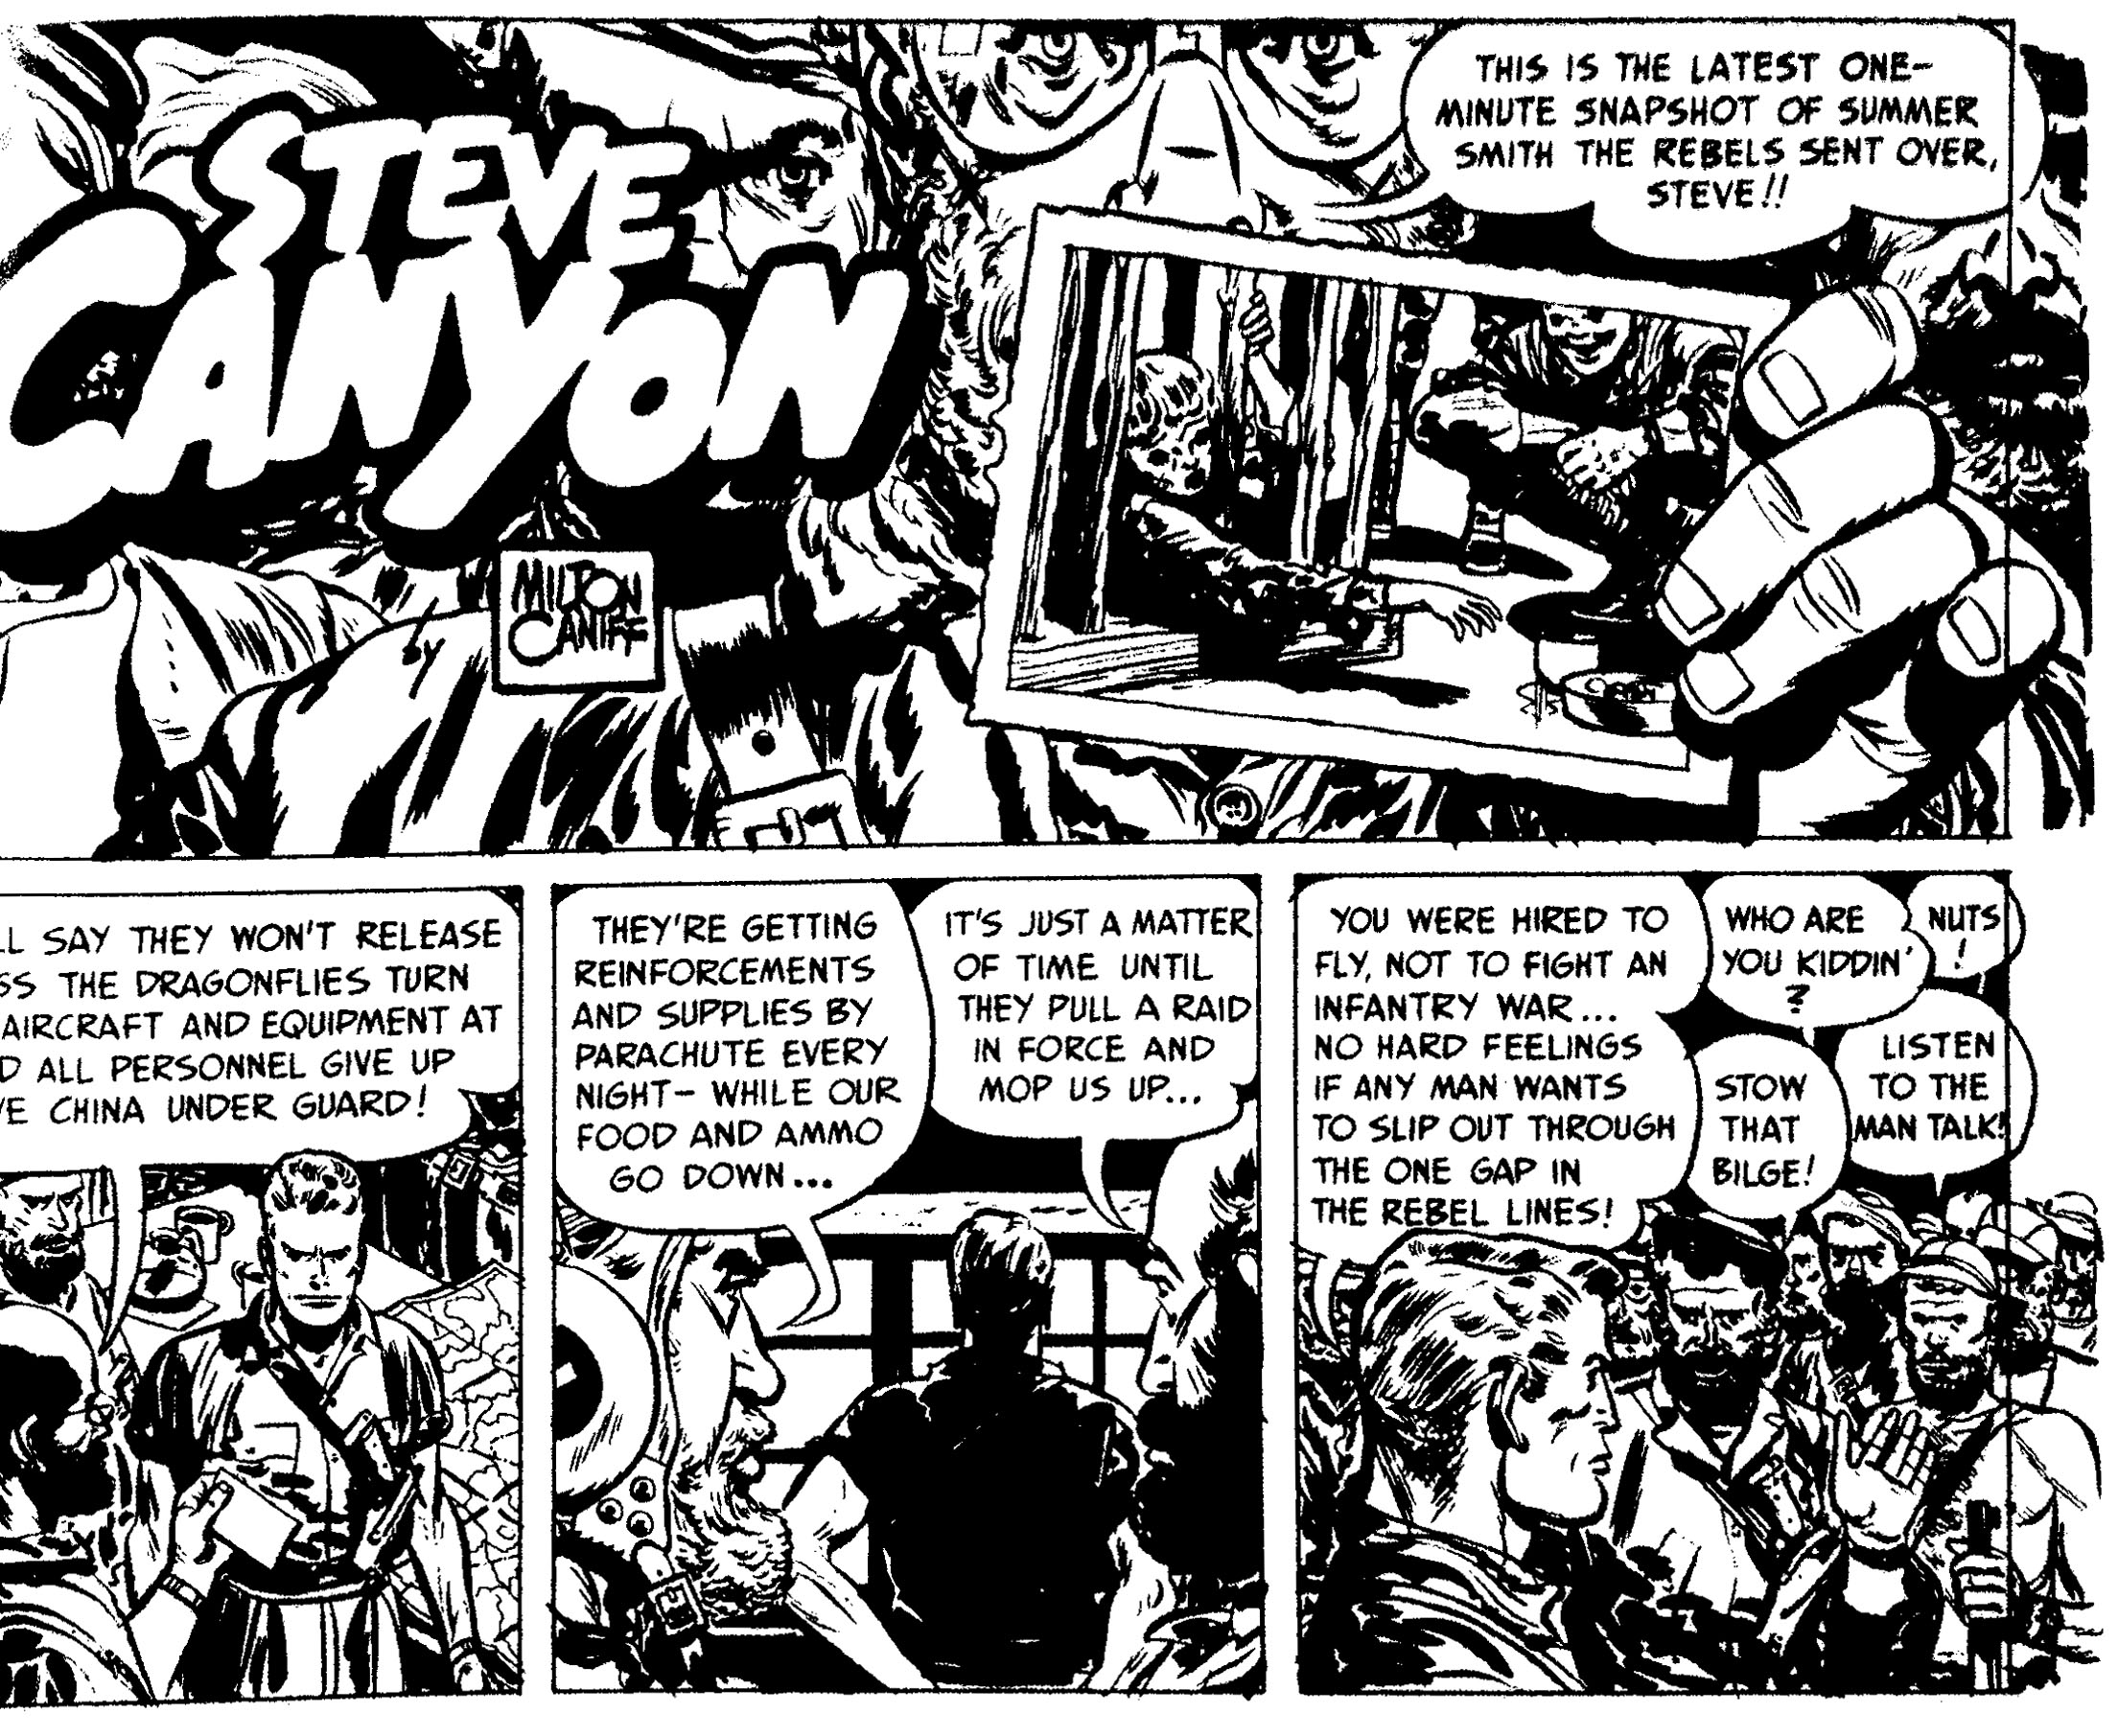 Steve Canyon 1949 review